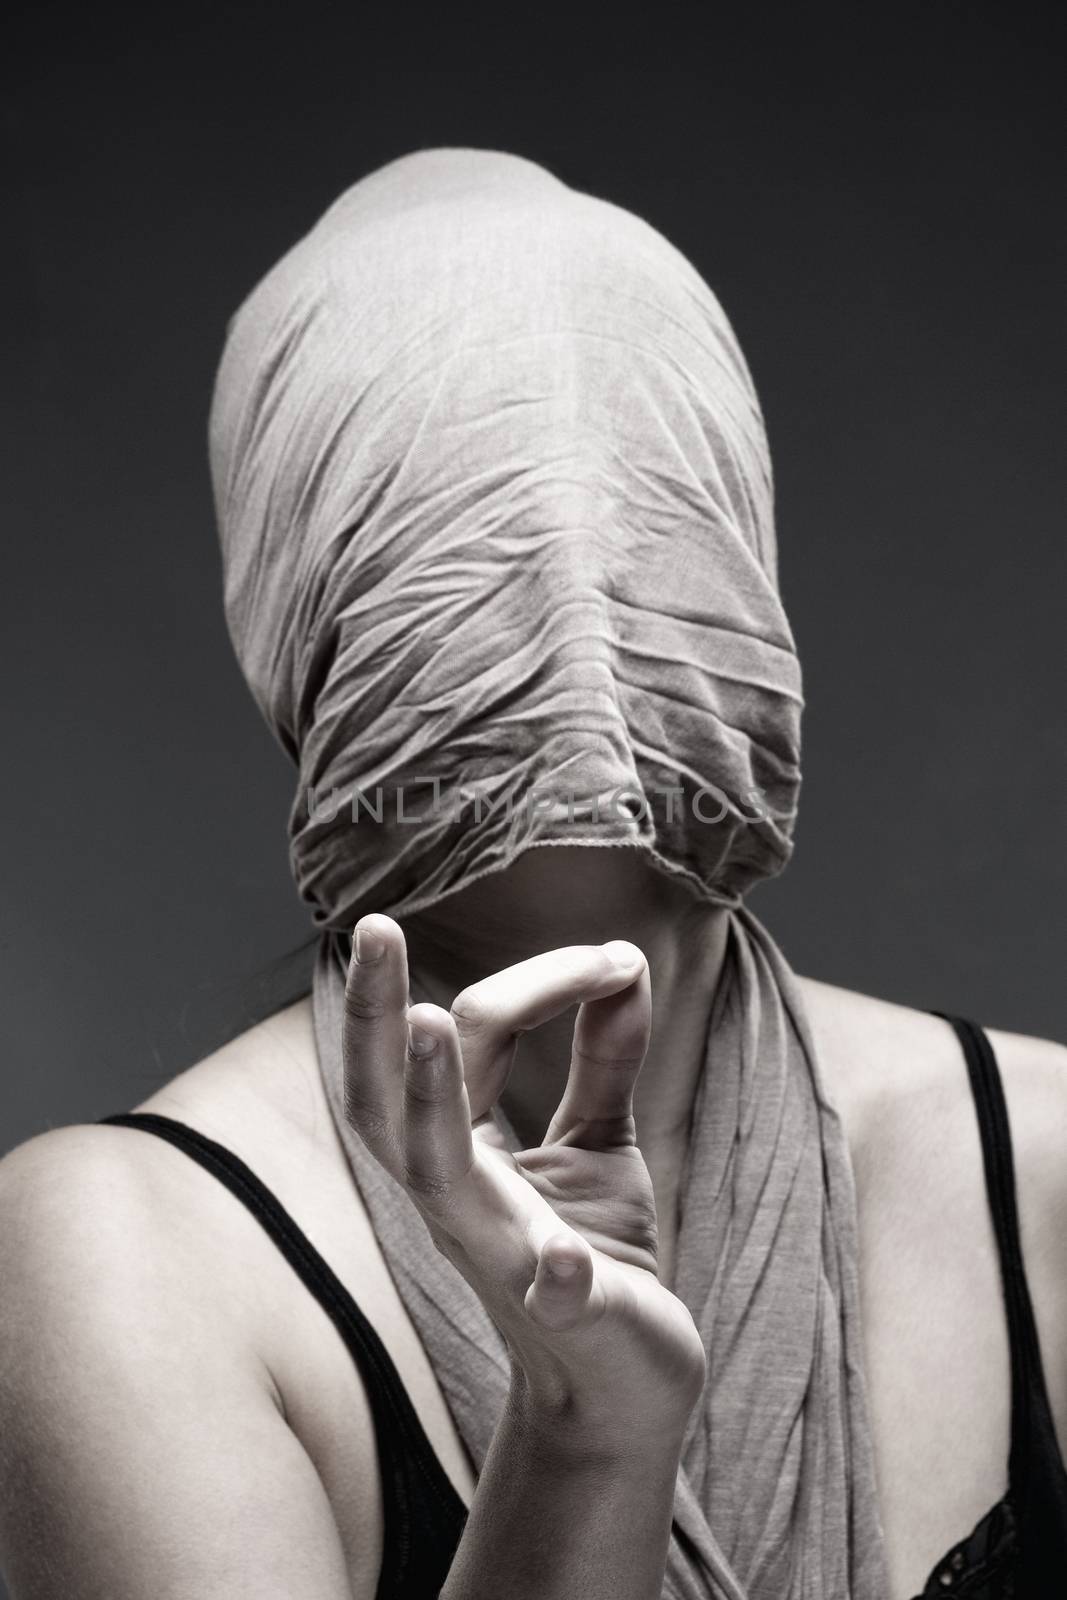 Woman Covering Face with Cloth, Making Hand Sign with Fingers